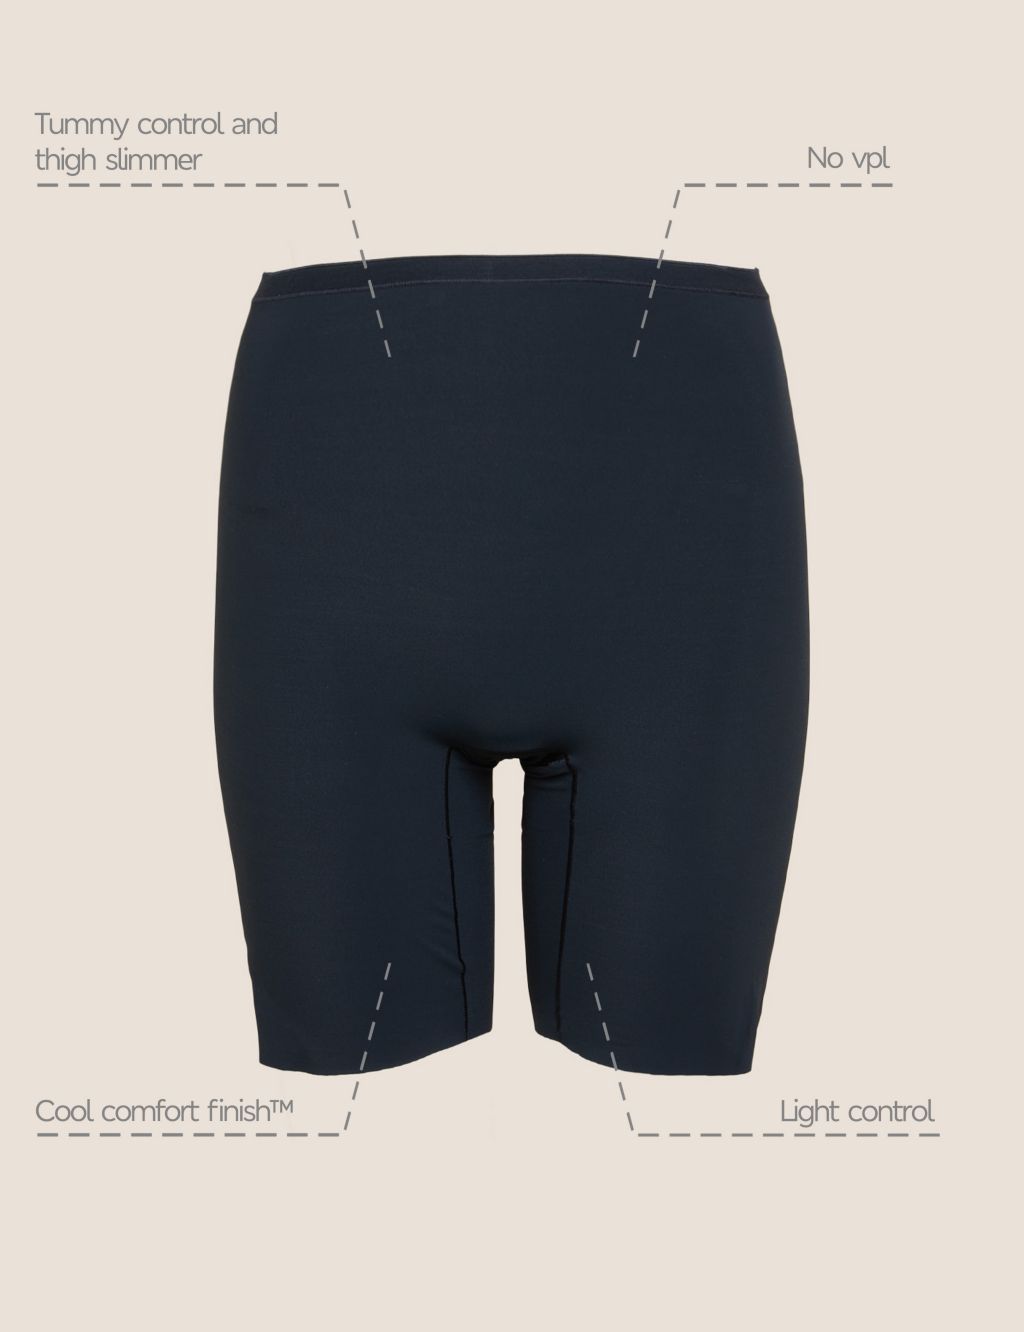 2pk Light Control Thigh Slimmers image 5